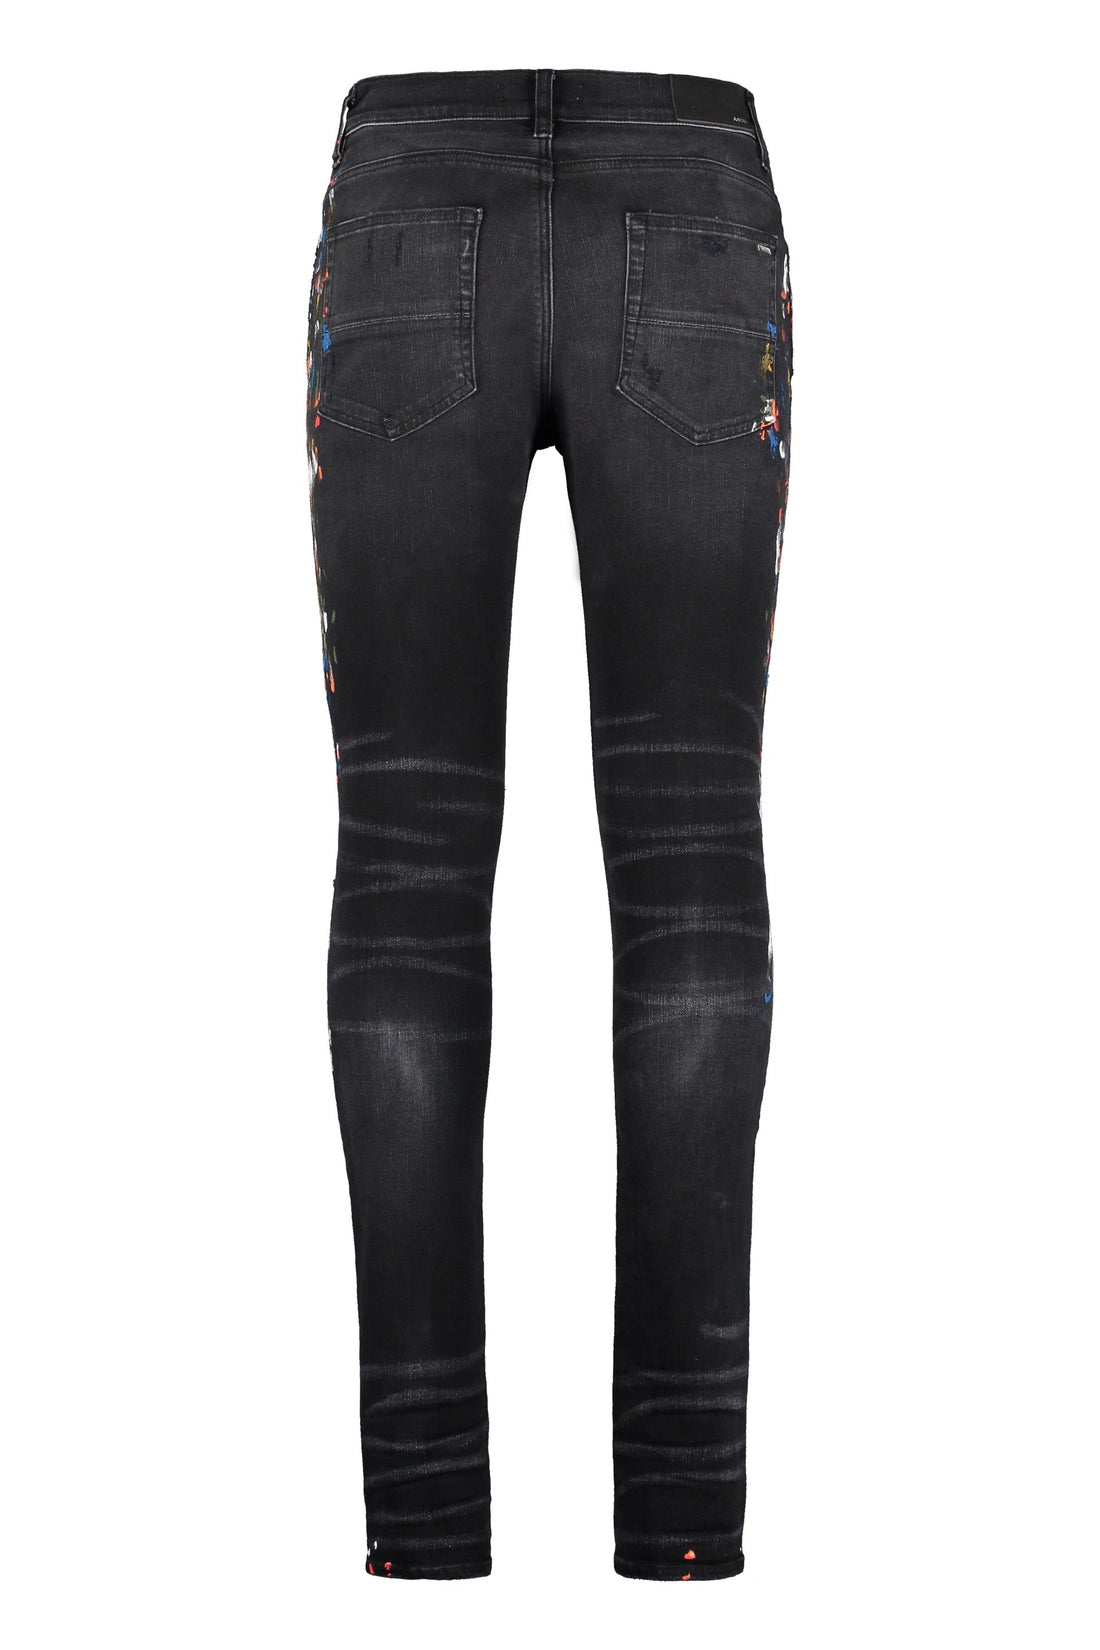 AMIRI-OUTLET-SALE-Stretch skinny jeans-ARCHIVIST